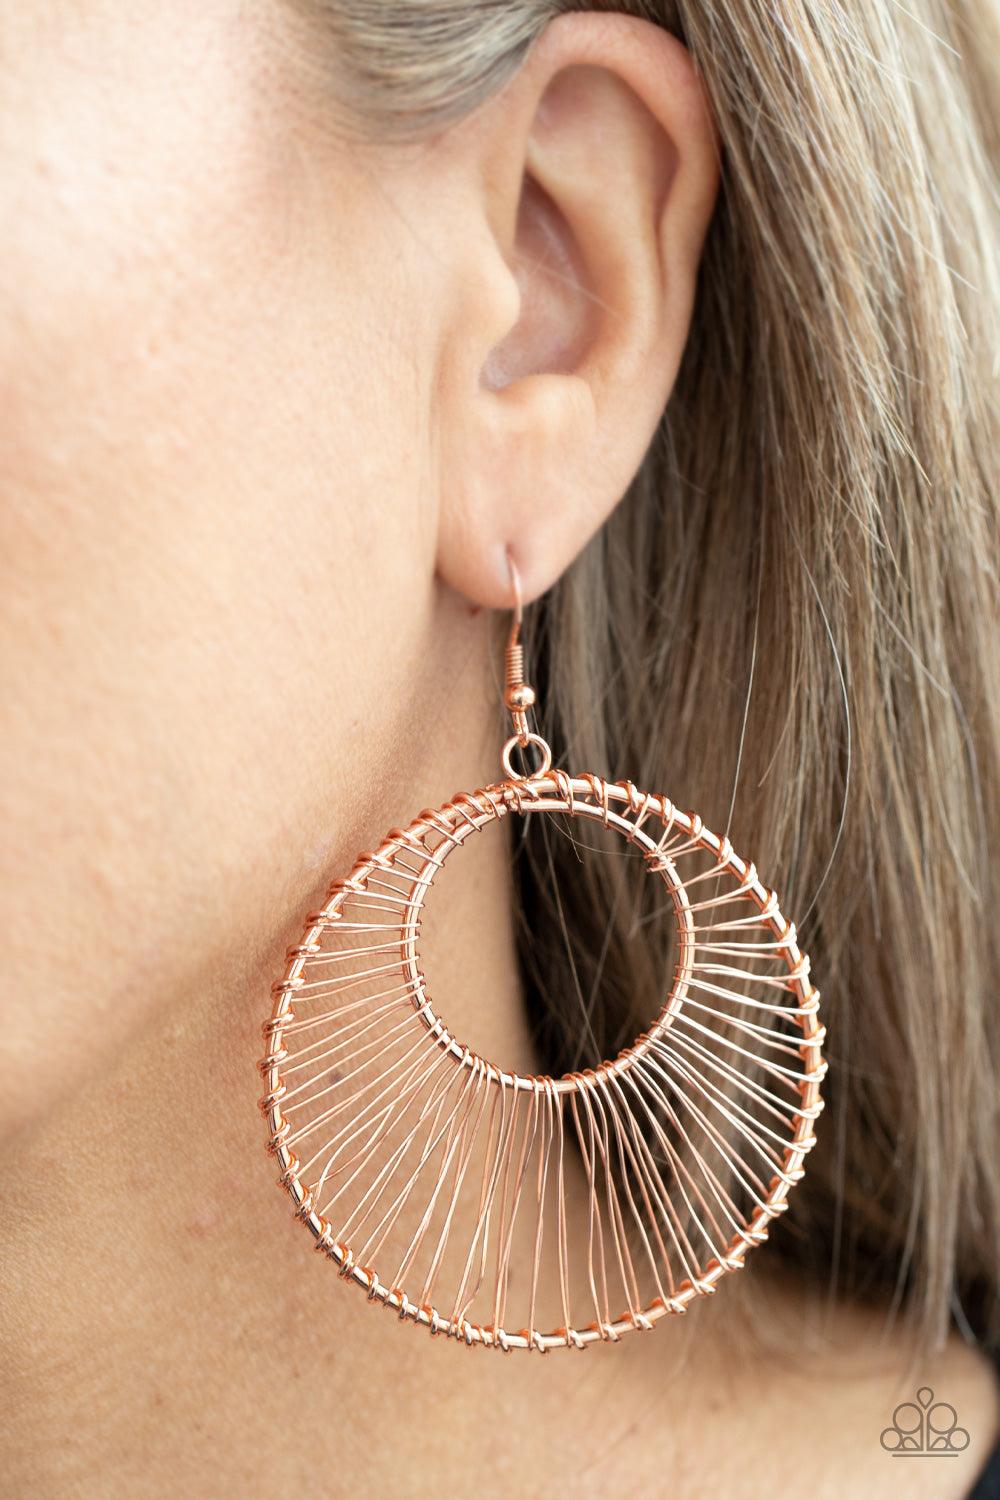 Paparazzi Accessories Artisan Applique - Copper Shiny copper wire wraps around two shiny copper hoops, creating an airy crescent shaped frame for an artisan inspired fashion. Earring attaches to a standard fishhook fitting. Sold as one pair of earrings. J